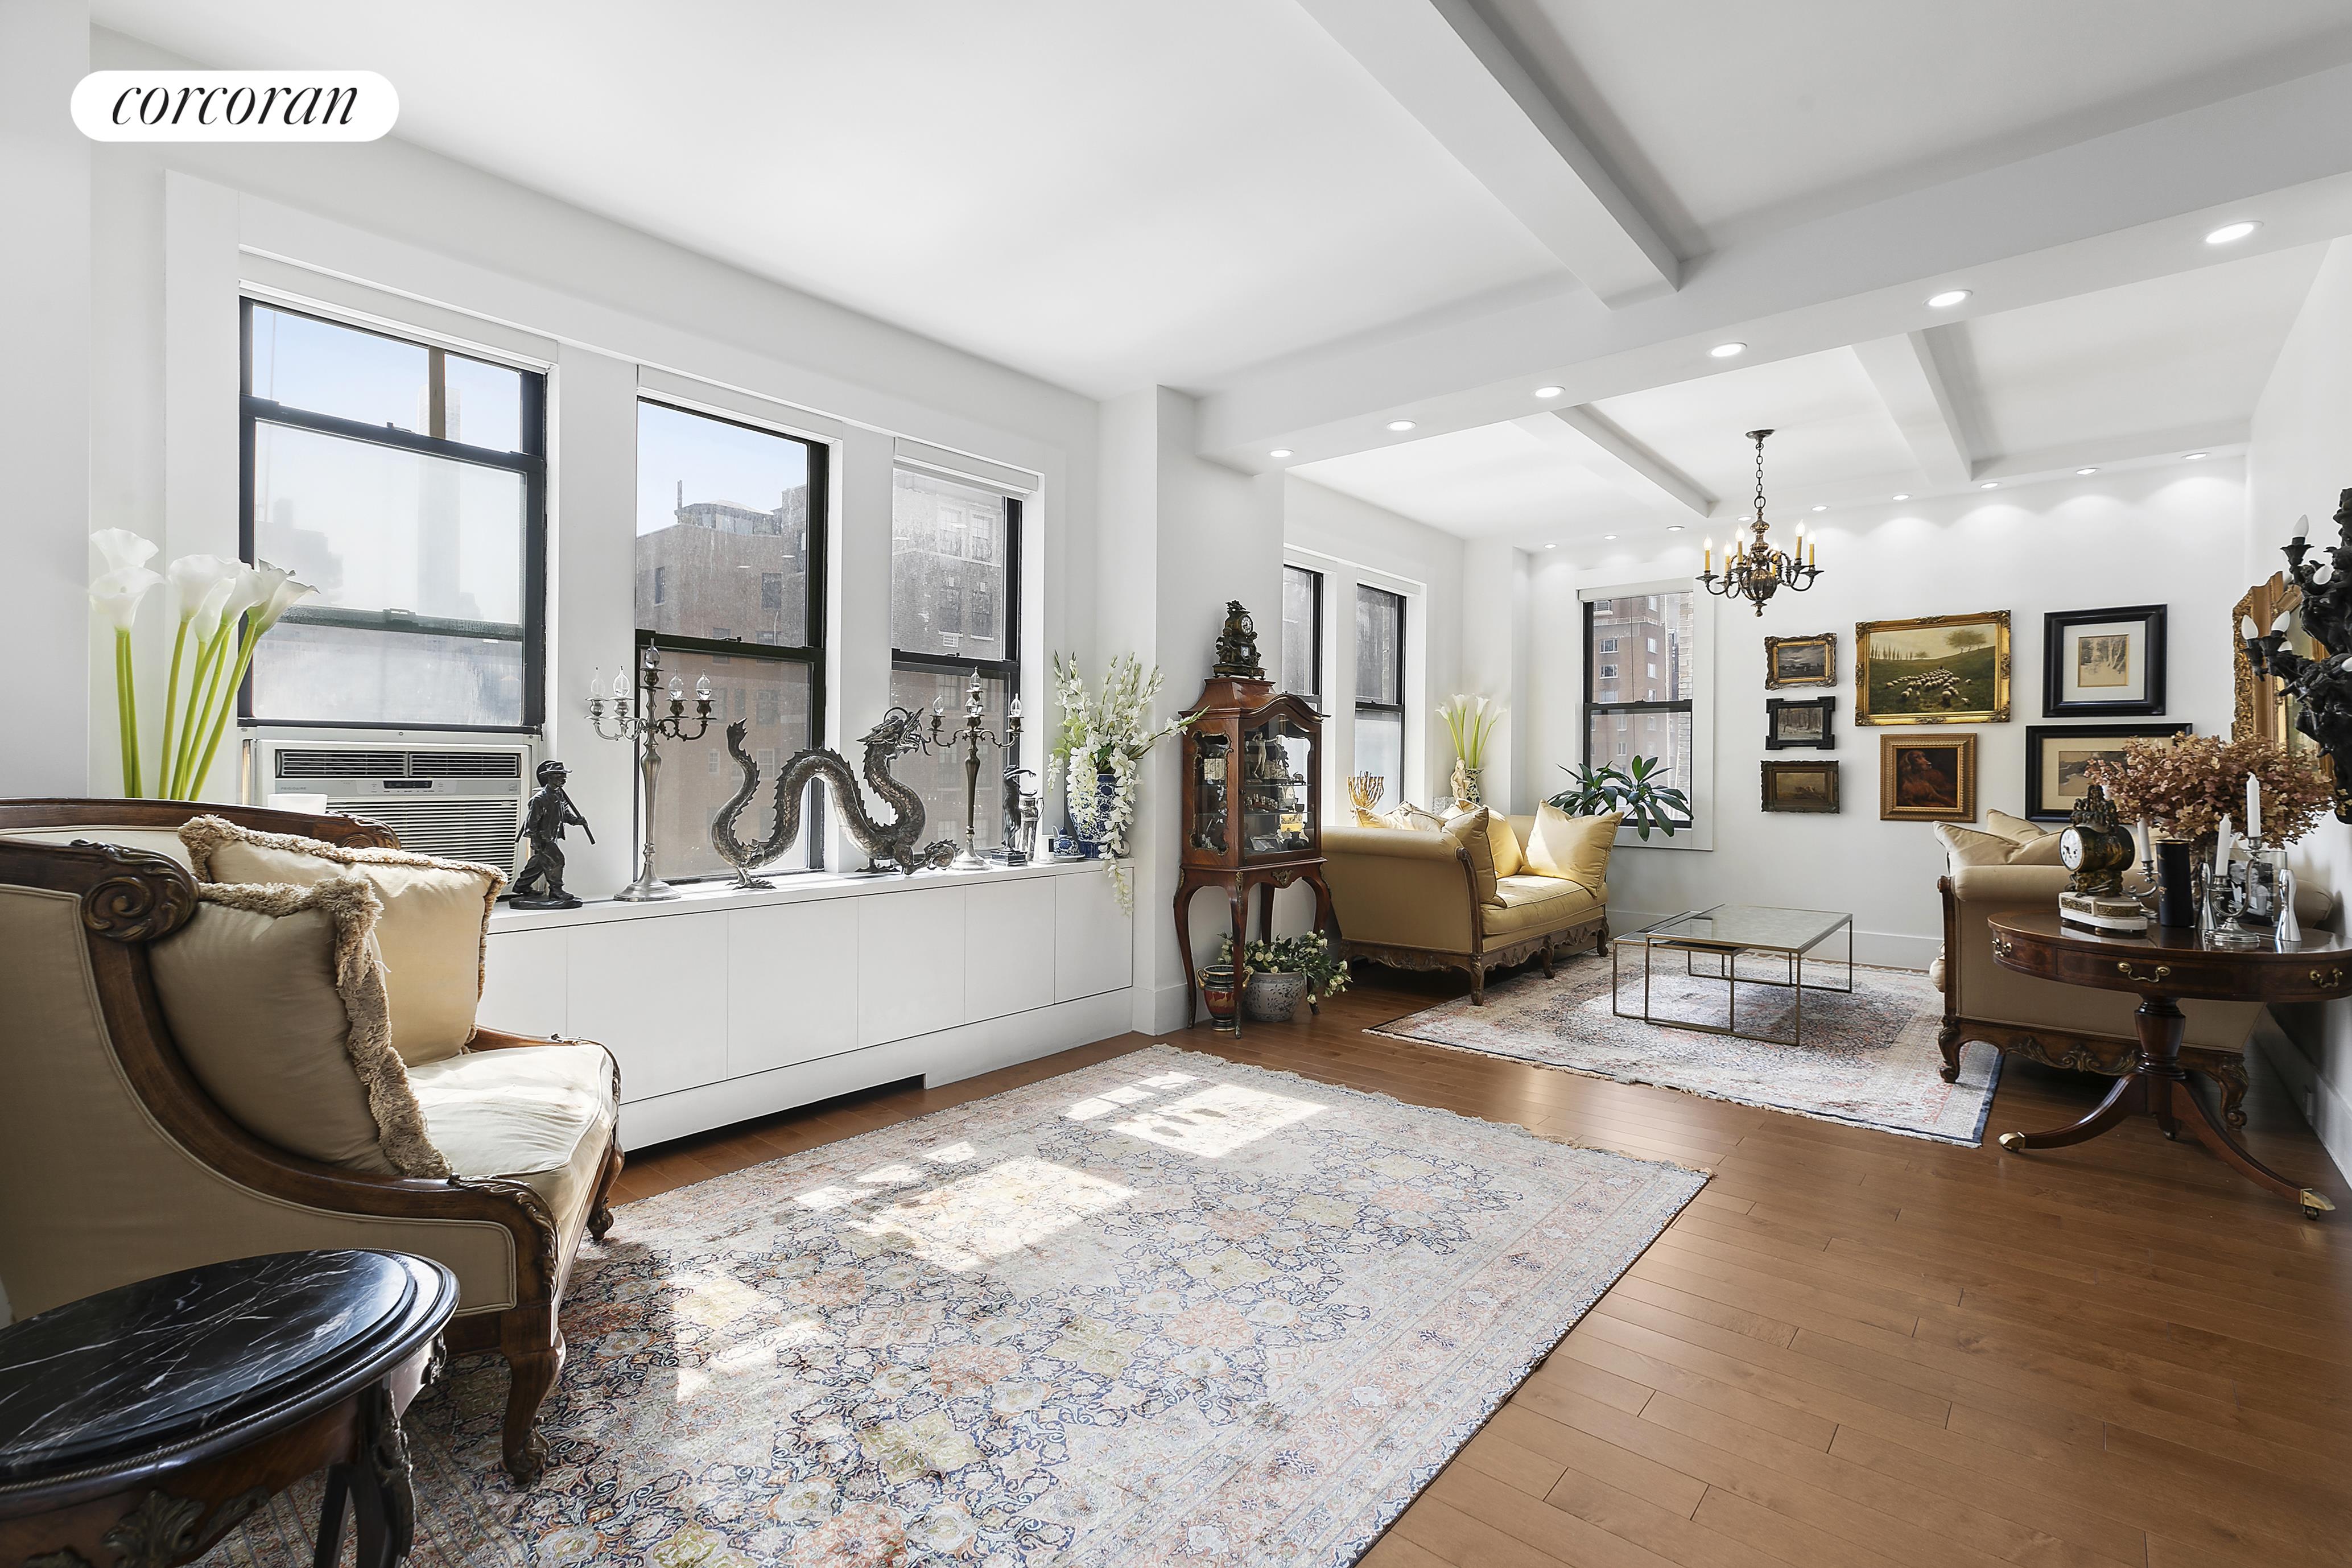 157 East 72nd Street 11F, Lenox Hill, Upper East Side, NYC - 3 Bedrooms  
3 Bathrooms  
6 Rooms - 